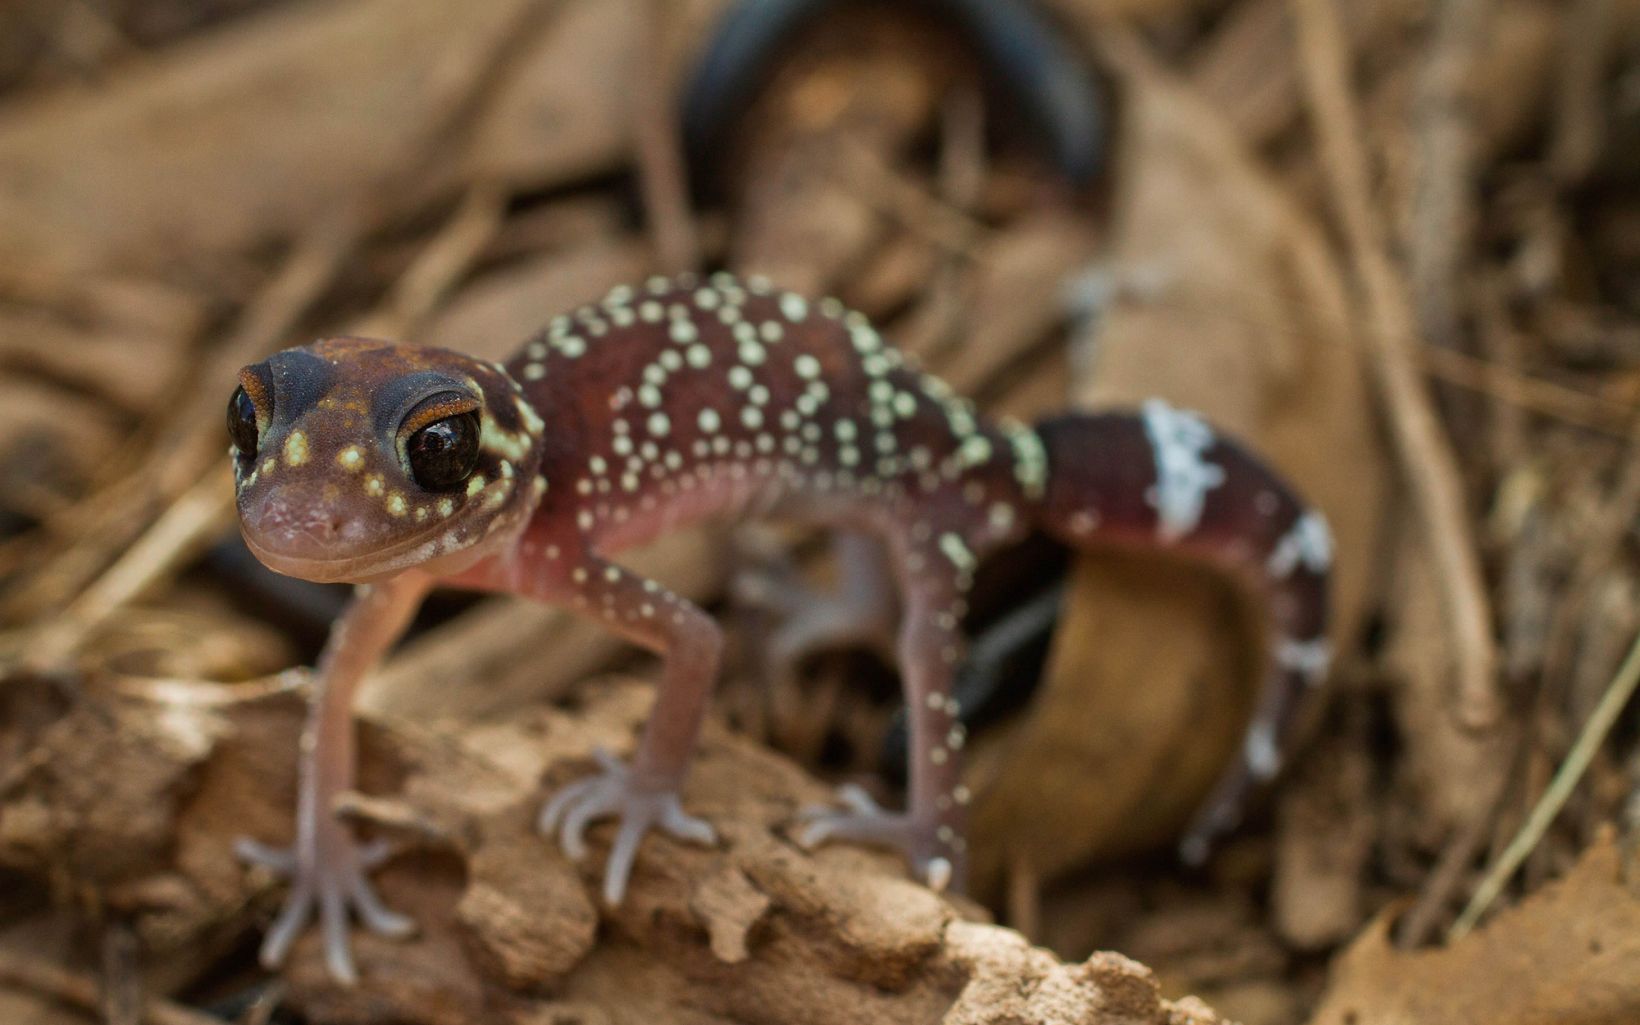 aka Barking Gecko can be found across southern Australia from south west of Western Australia through to south east Queensland, but not found in southern Victoria or Tasmania.